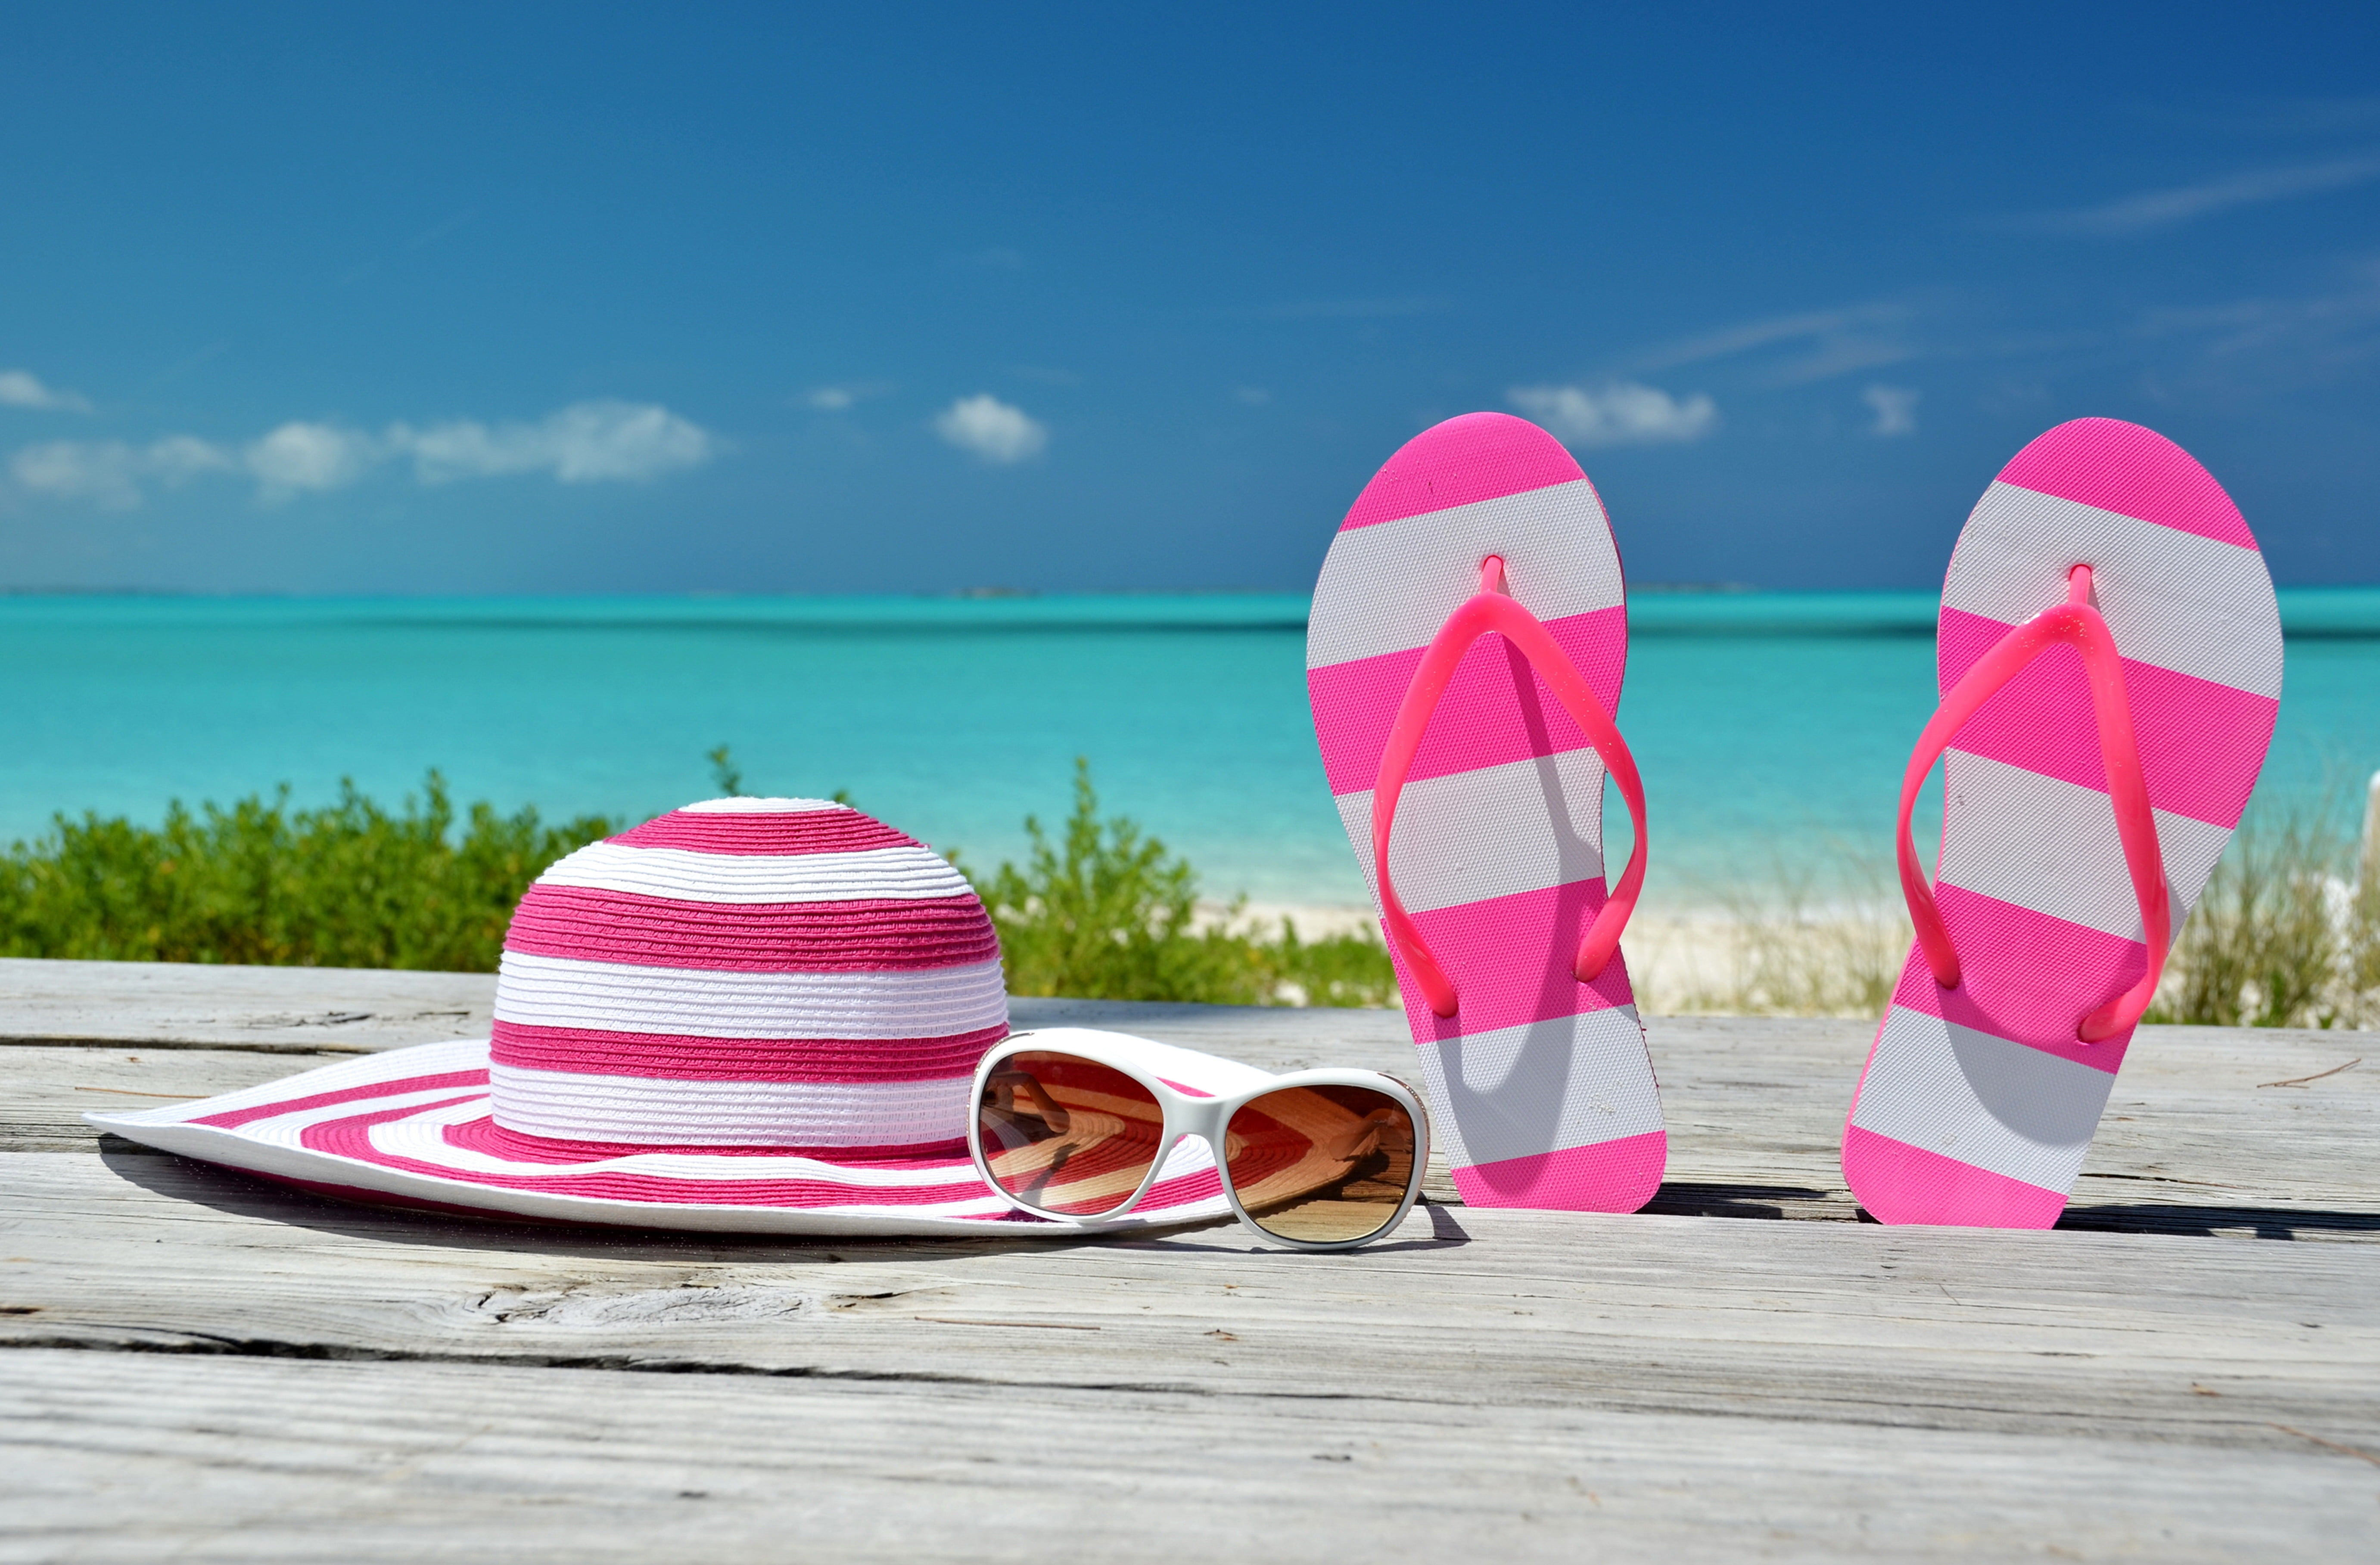 pair of pink-and-white striped flip-flops and sun hat, sea, beach